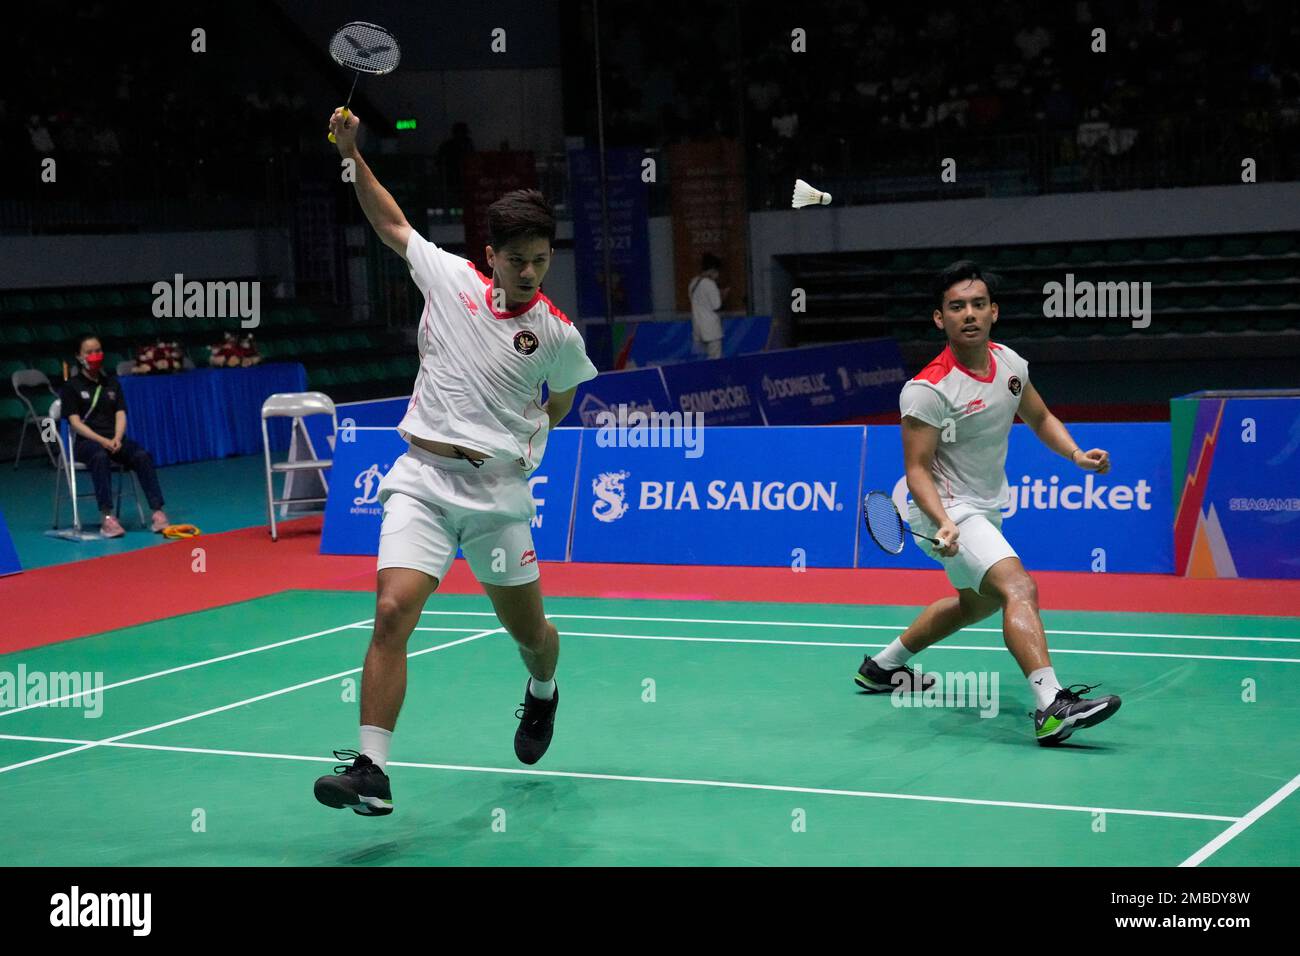 Indonesias Pramudya Kusumawardana, right, and Yeremia Rambitan compete against their compatriots Leo Rolly Carnando and Daniel Marthin during their mens doubles badminton final match at the 31st Southeast Asian Games (SEA Games)